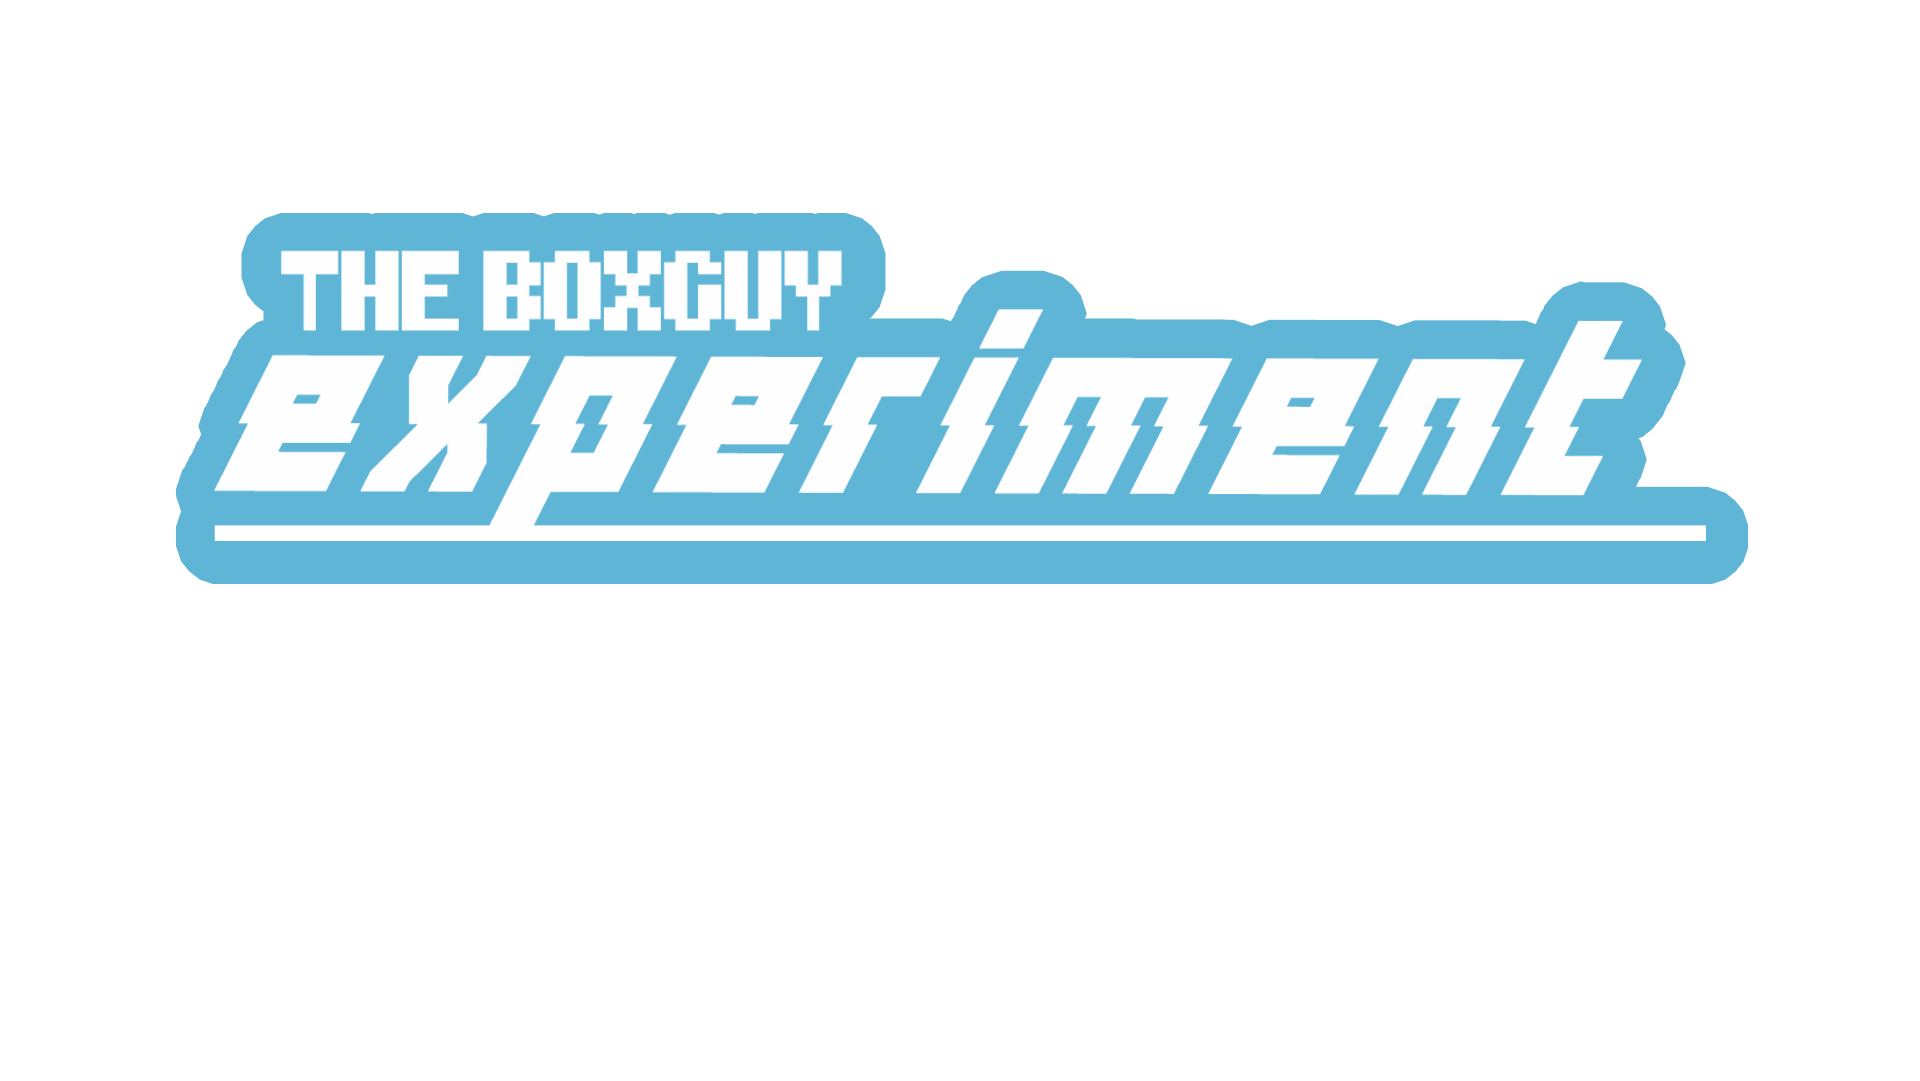 the boxguy experiment(OLD PROTOTYPE)